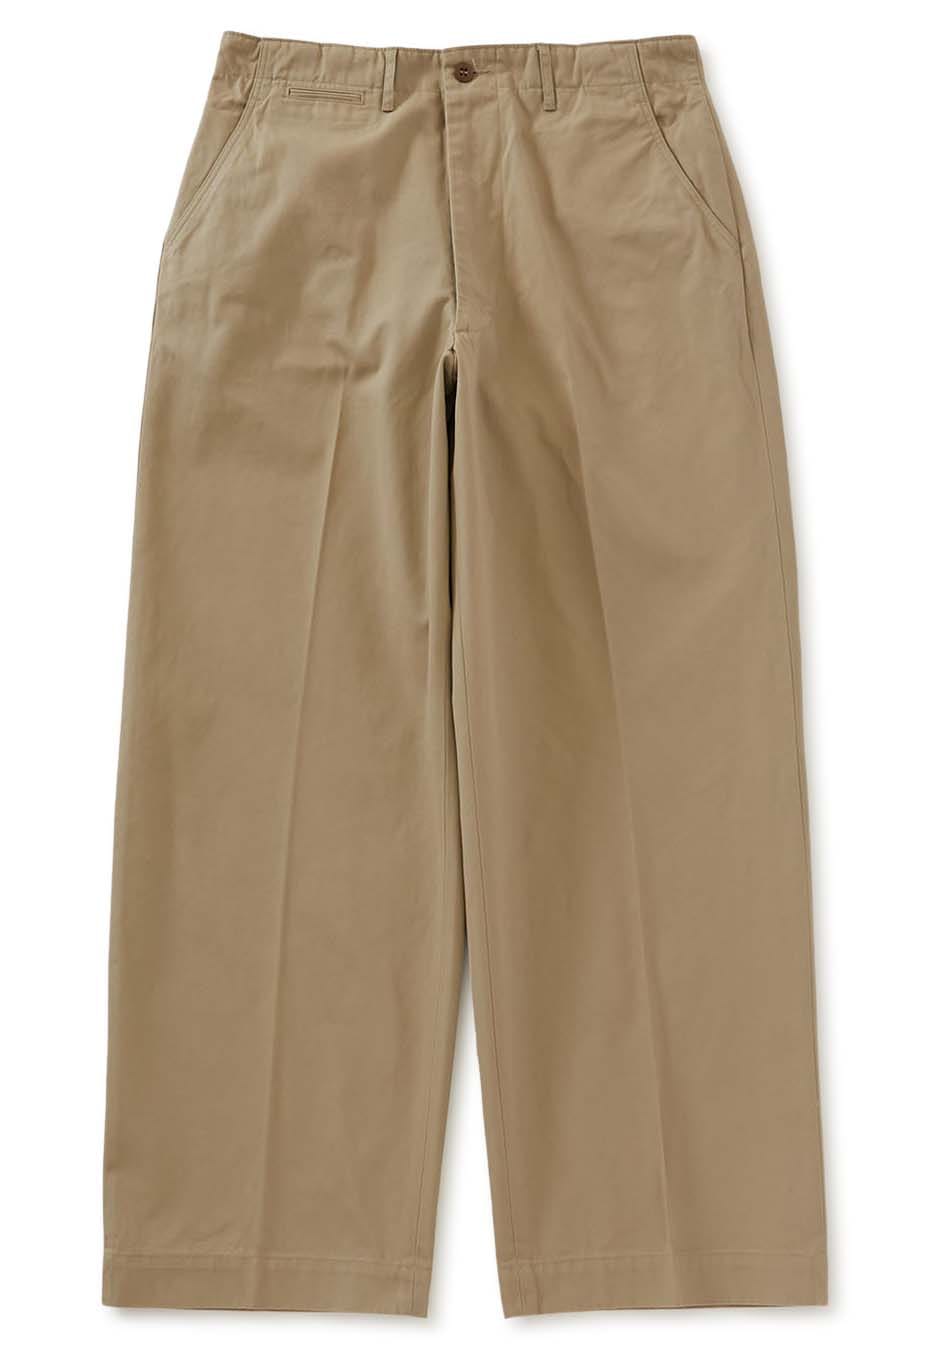 3PLY Chino Military Trousers